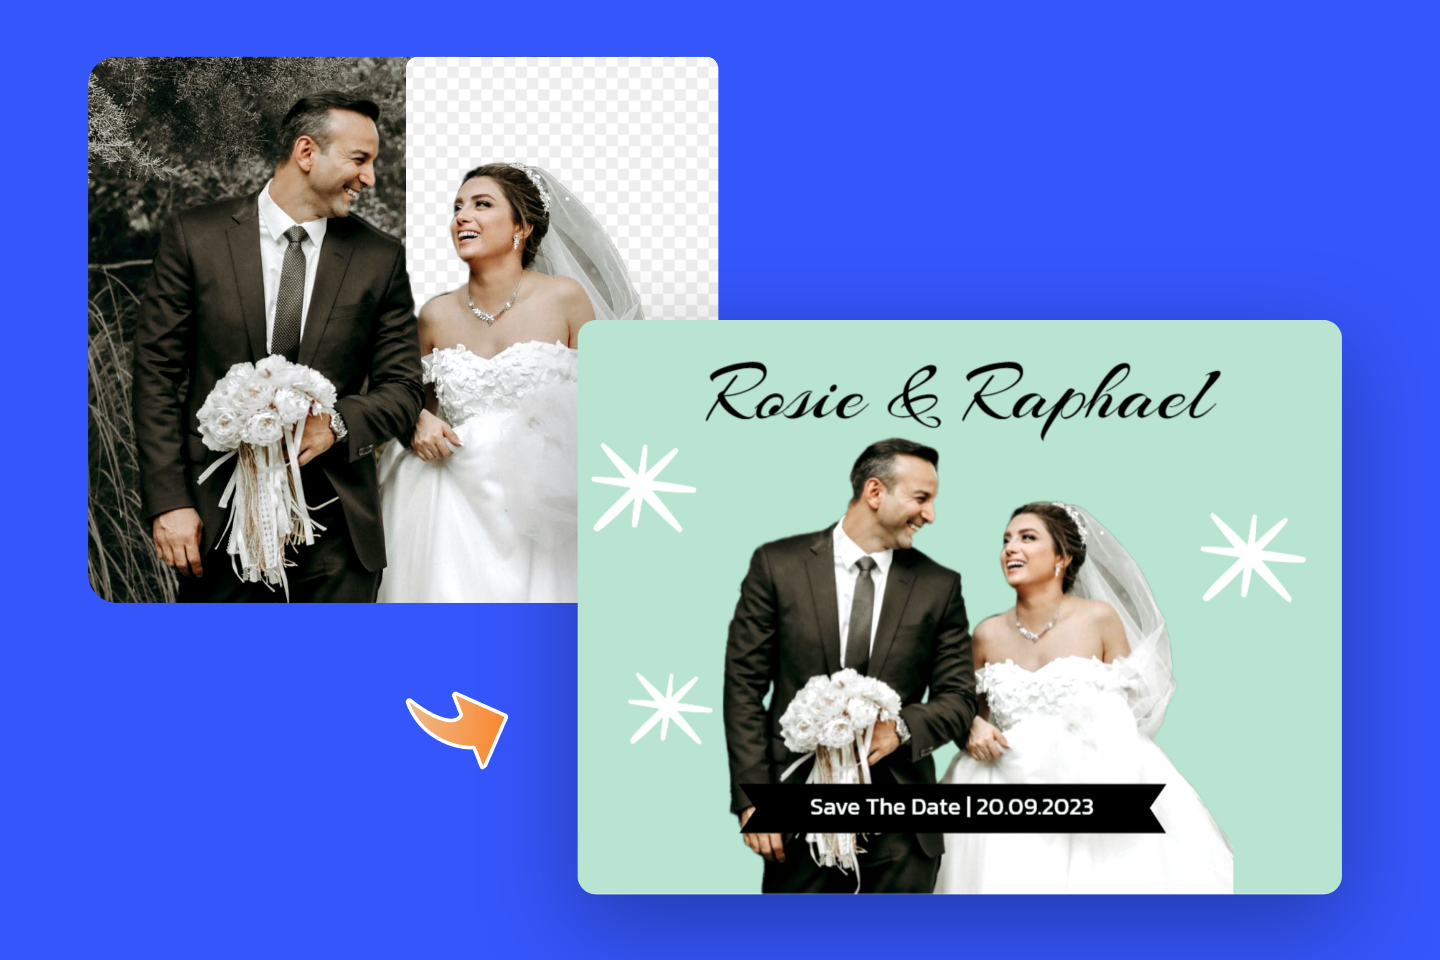 Use own transparent image as the wedding card design material in Fotor onine wedding card maker